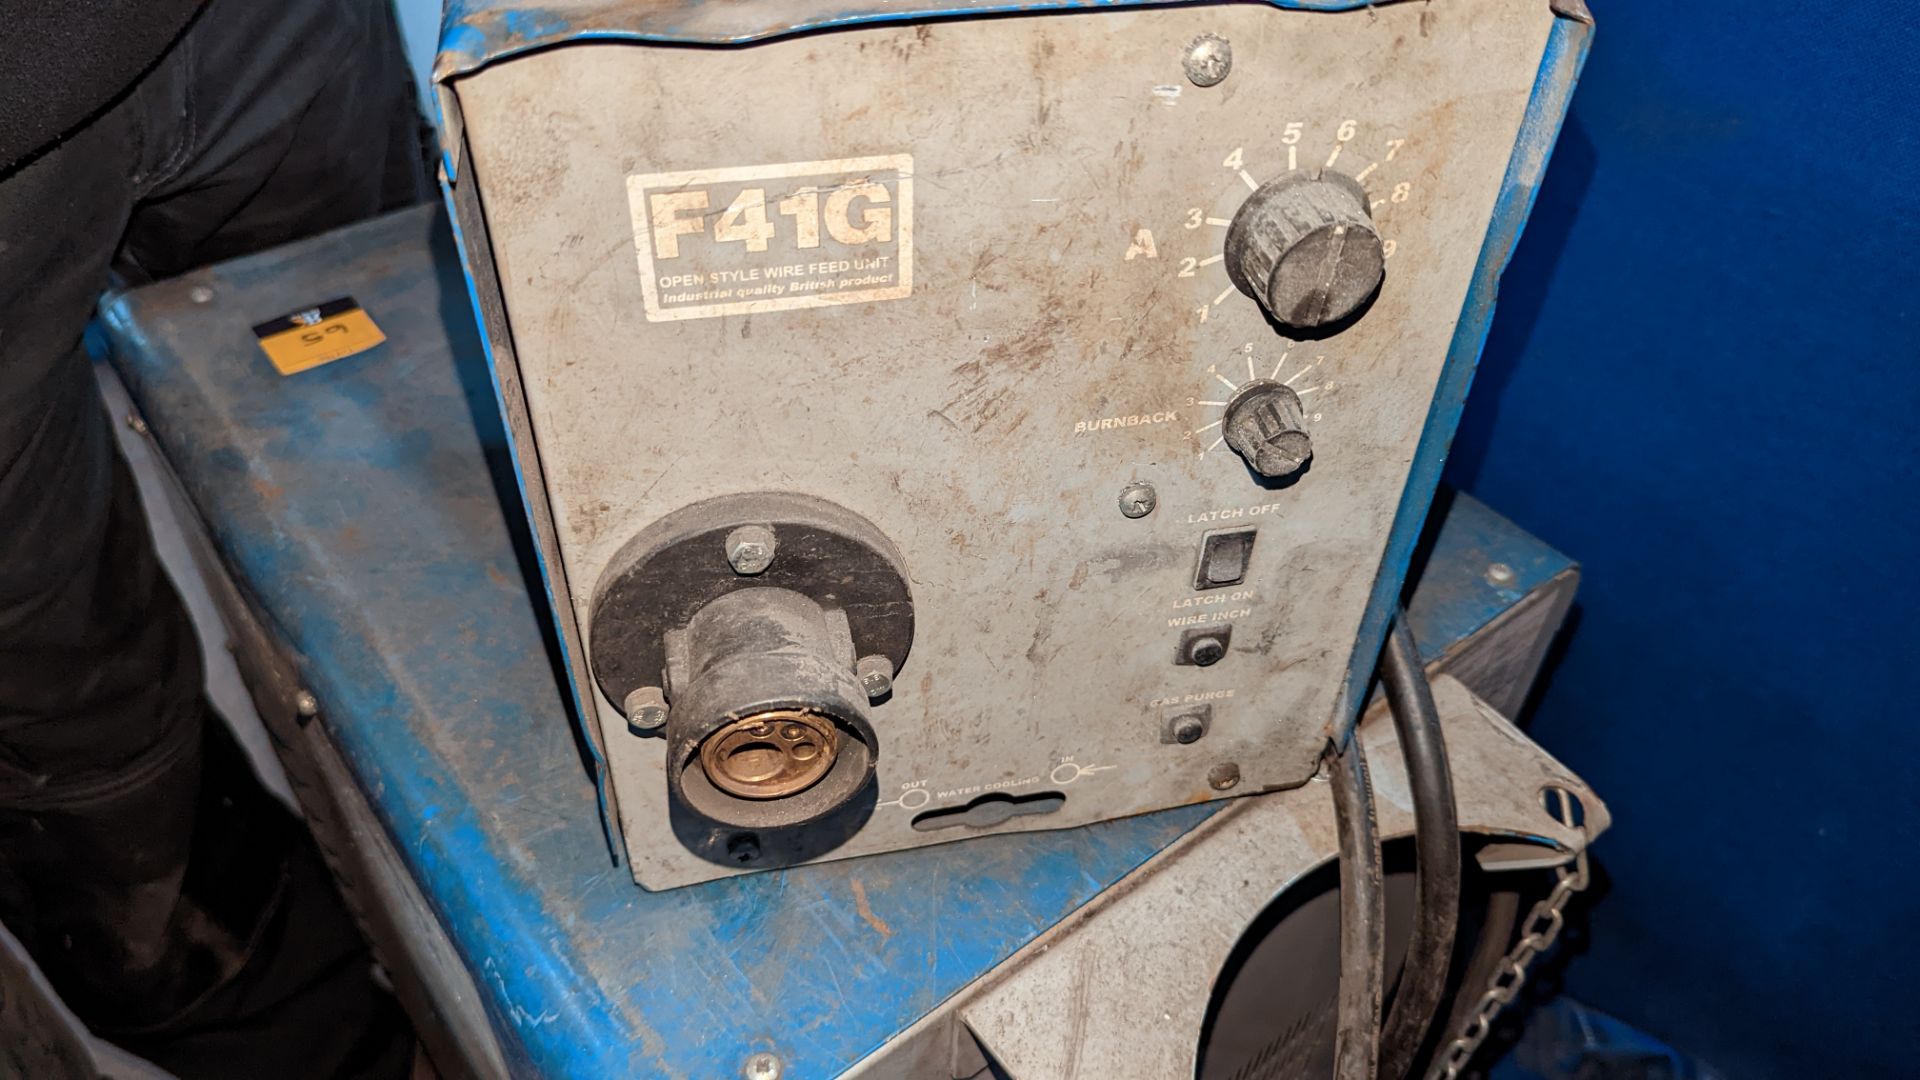 Welding system comprising KAYMIG400S welder plus model F41G wire feed - Image 6 of 9